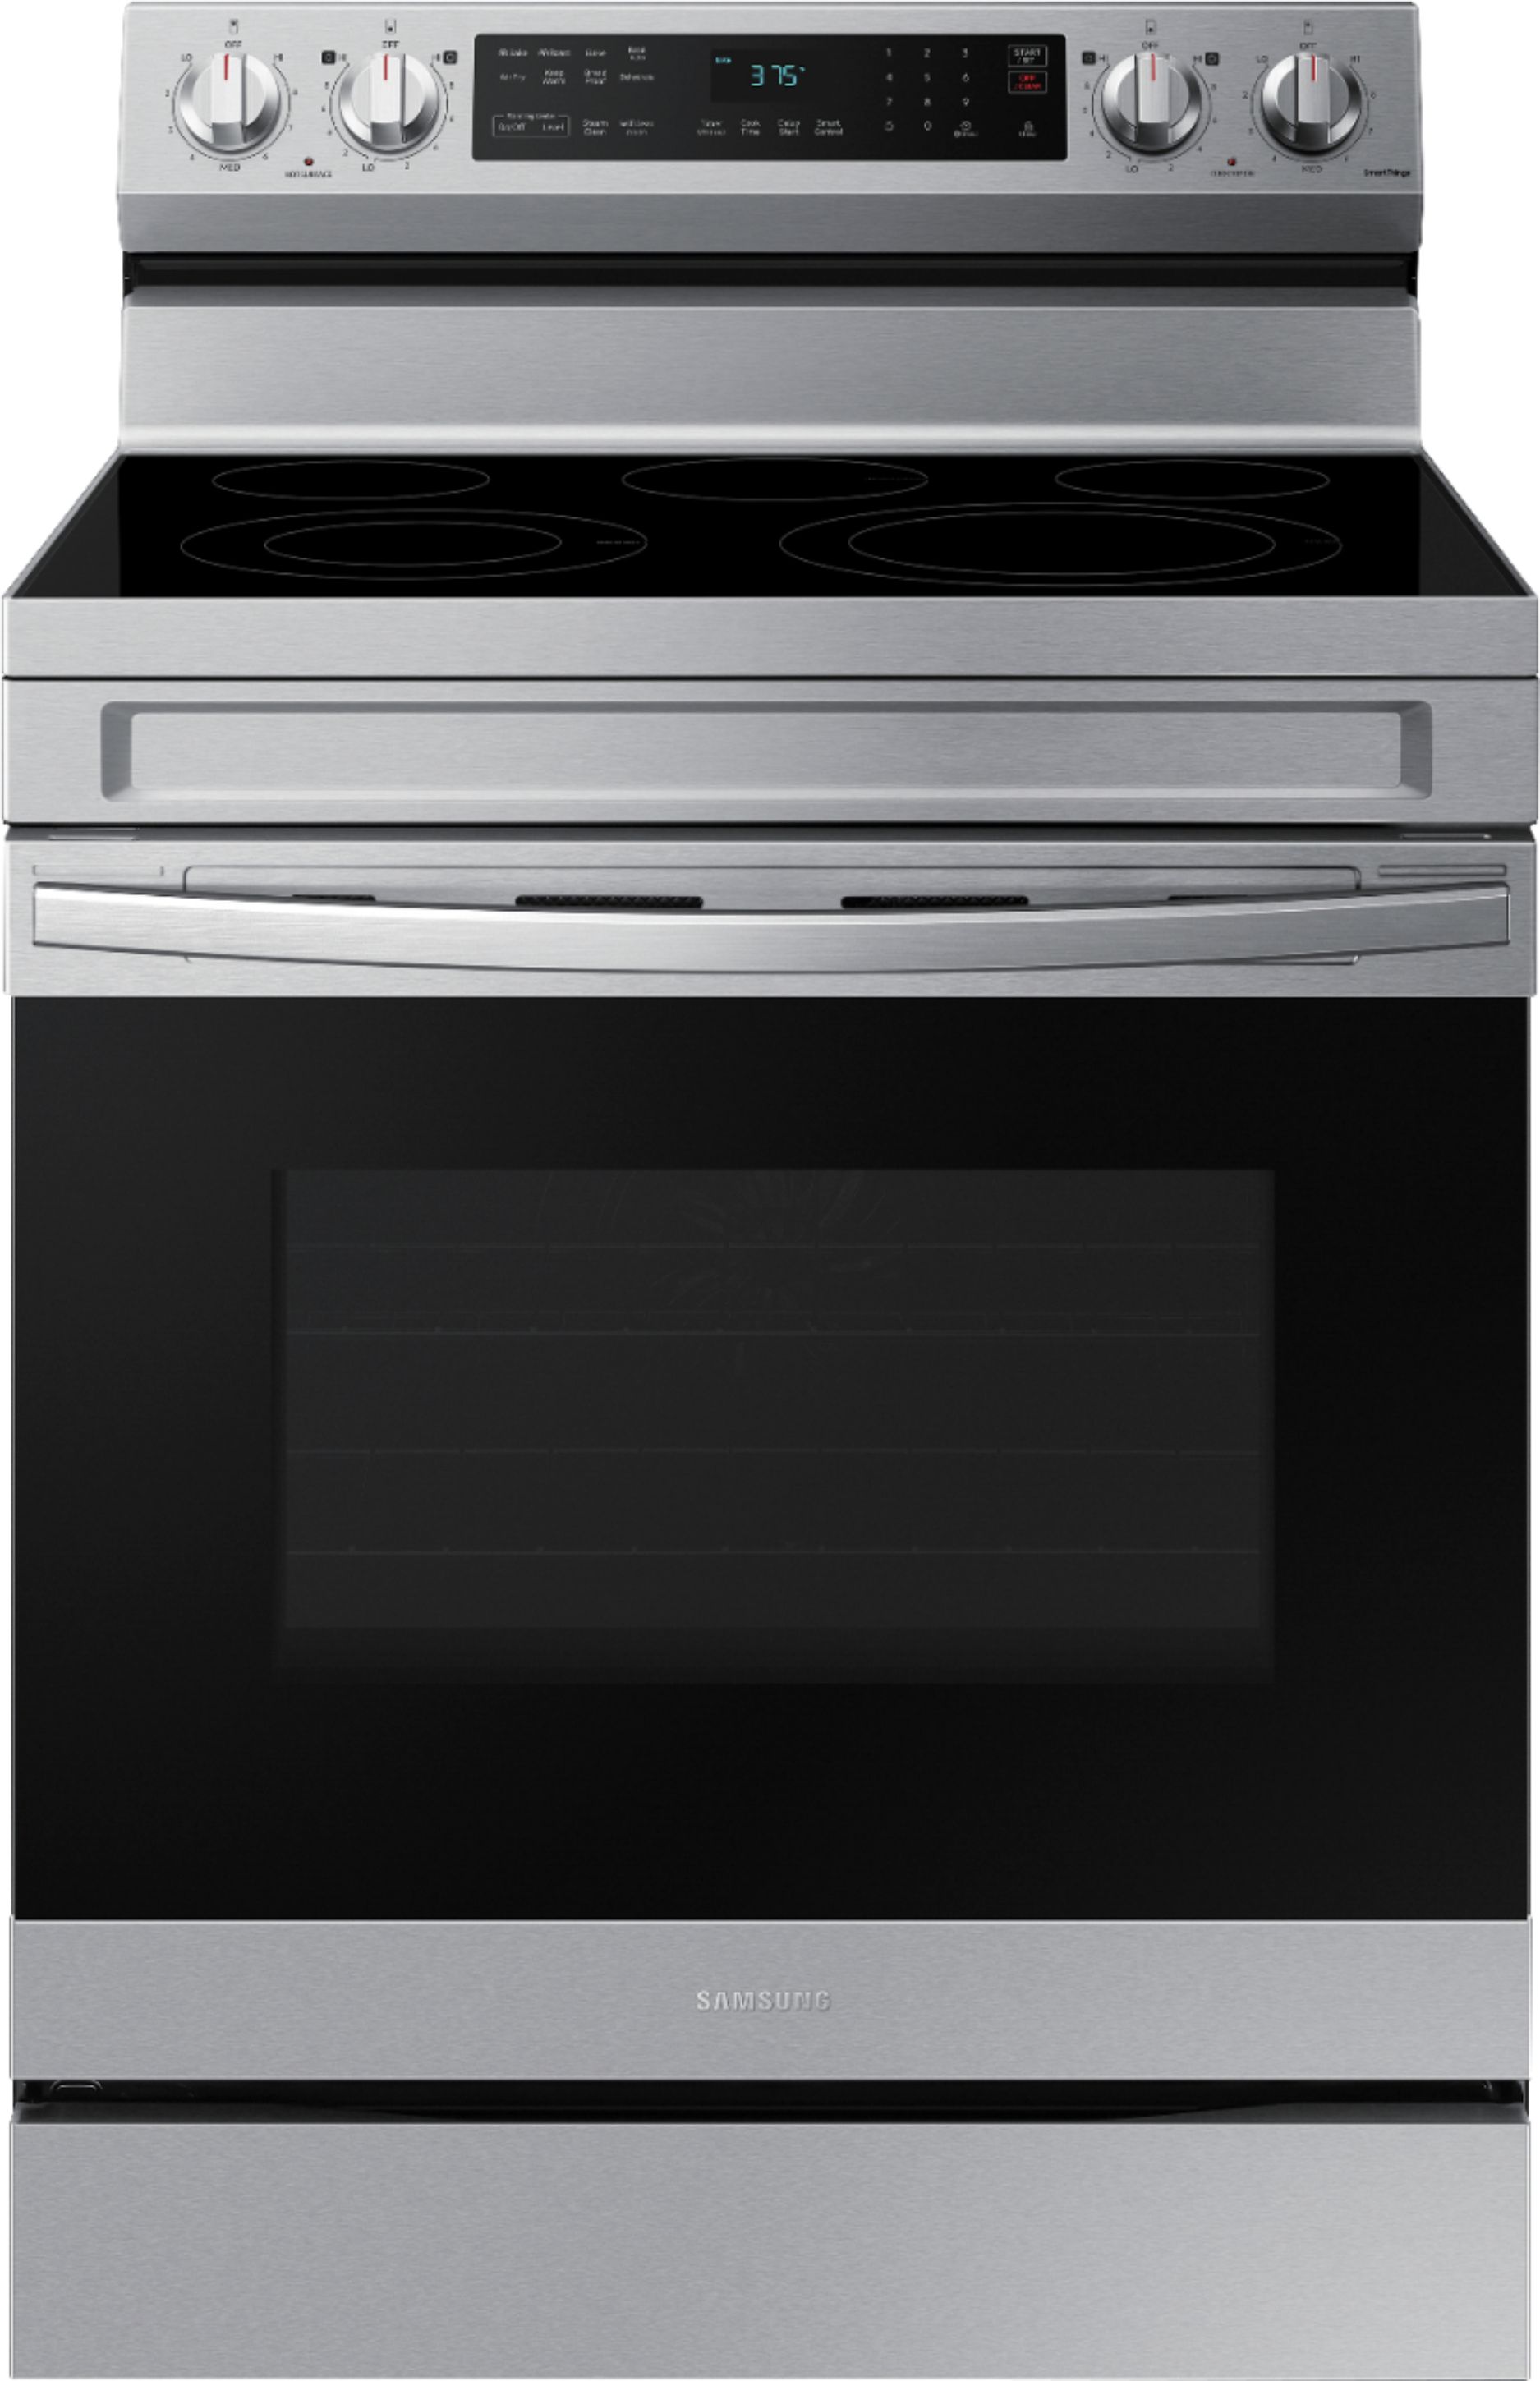 image of Samsung - 6.3 cu. ft. Freestanding Electric Range with WiFi, No-Preheat Air Fry & Convection - Stainless steel with sku:ne63a6511ss-electronicexpress